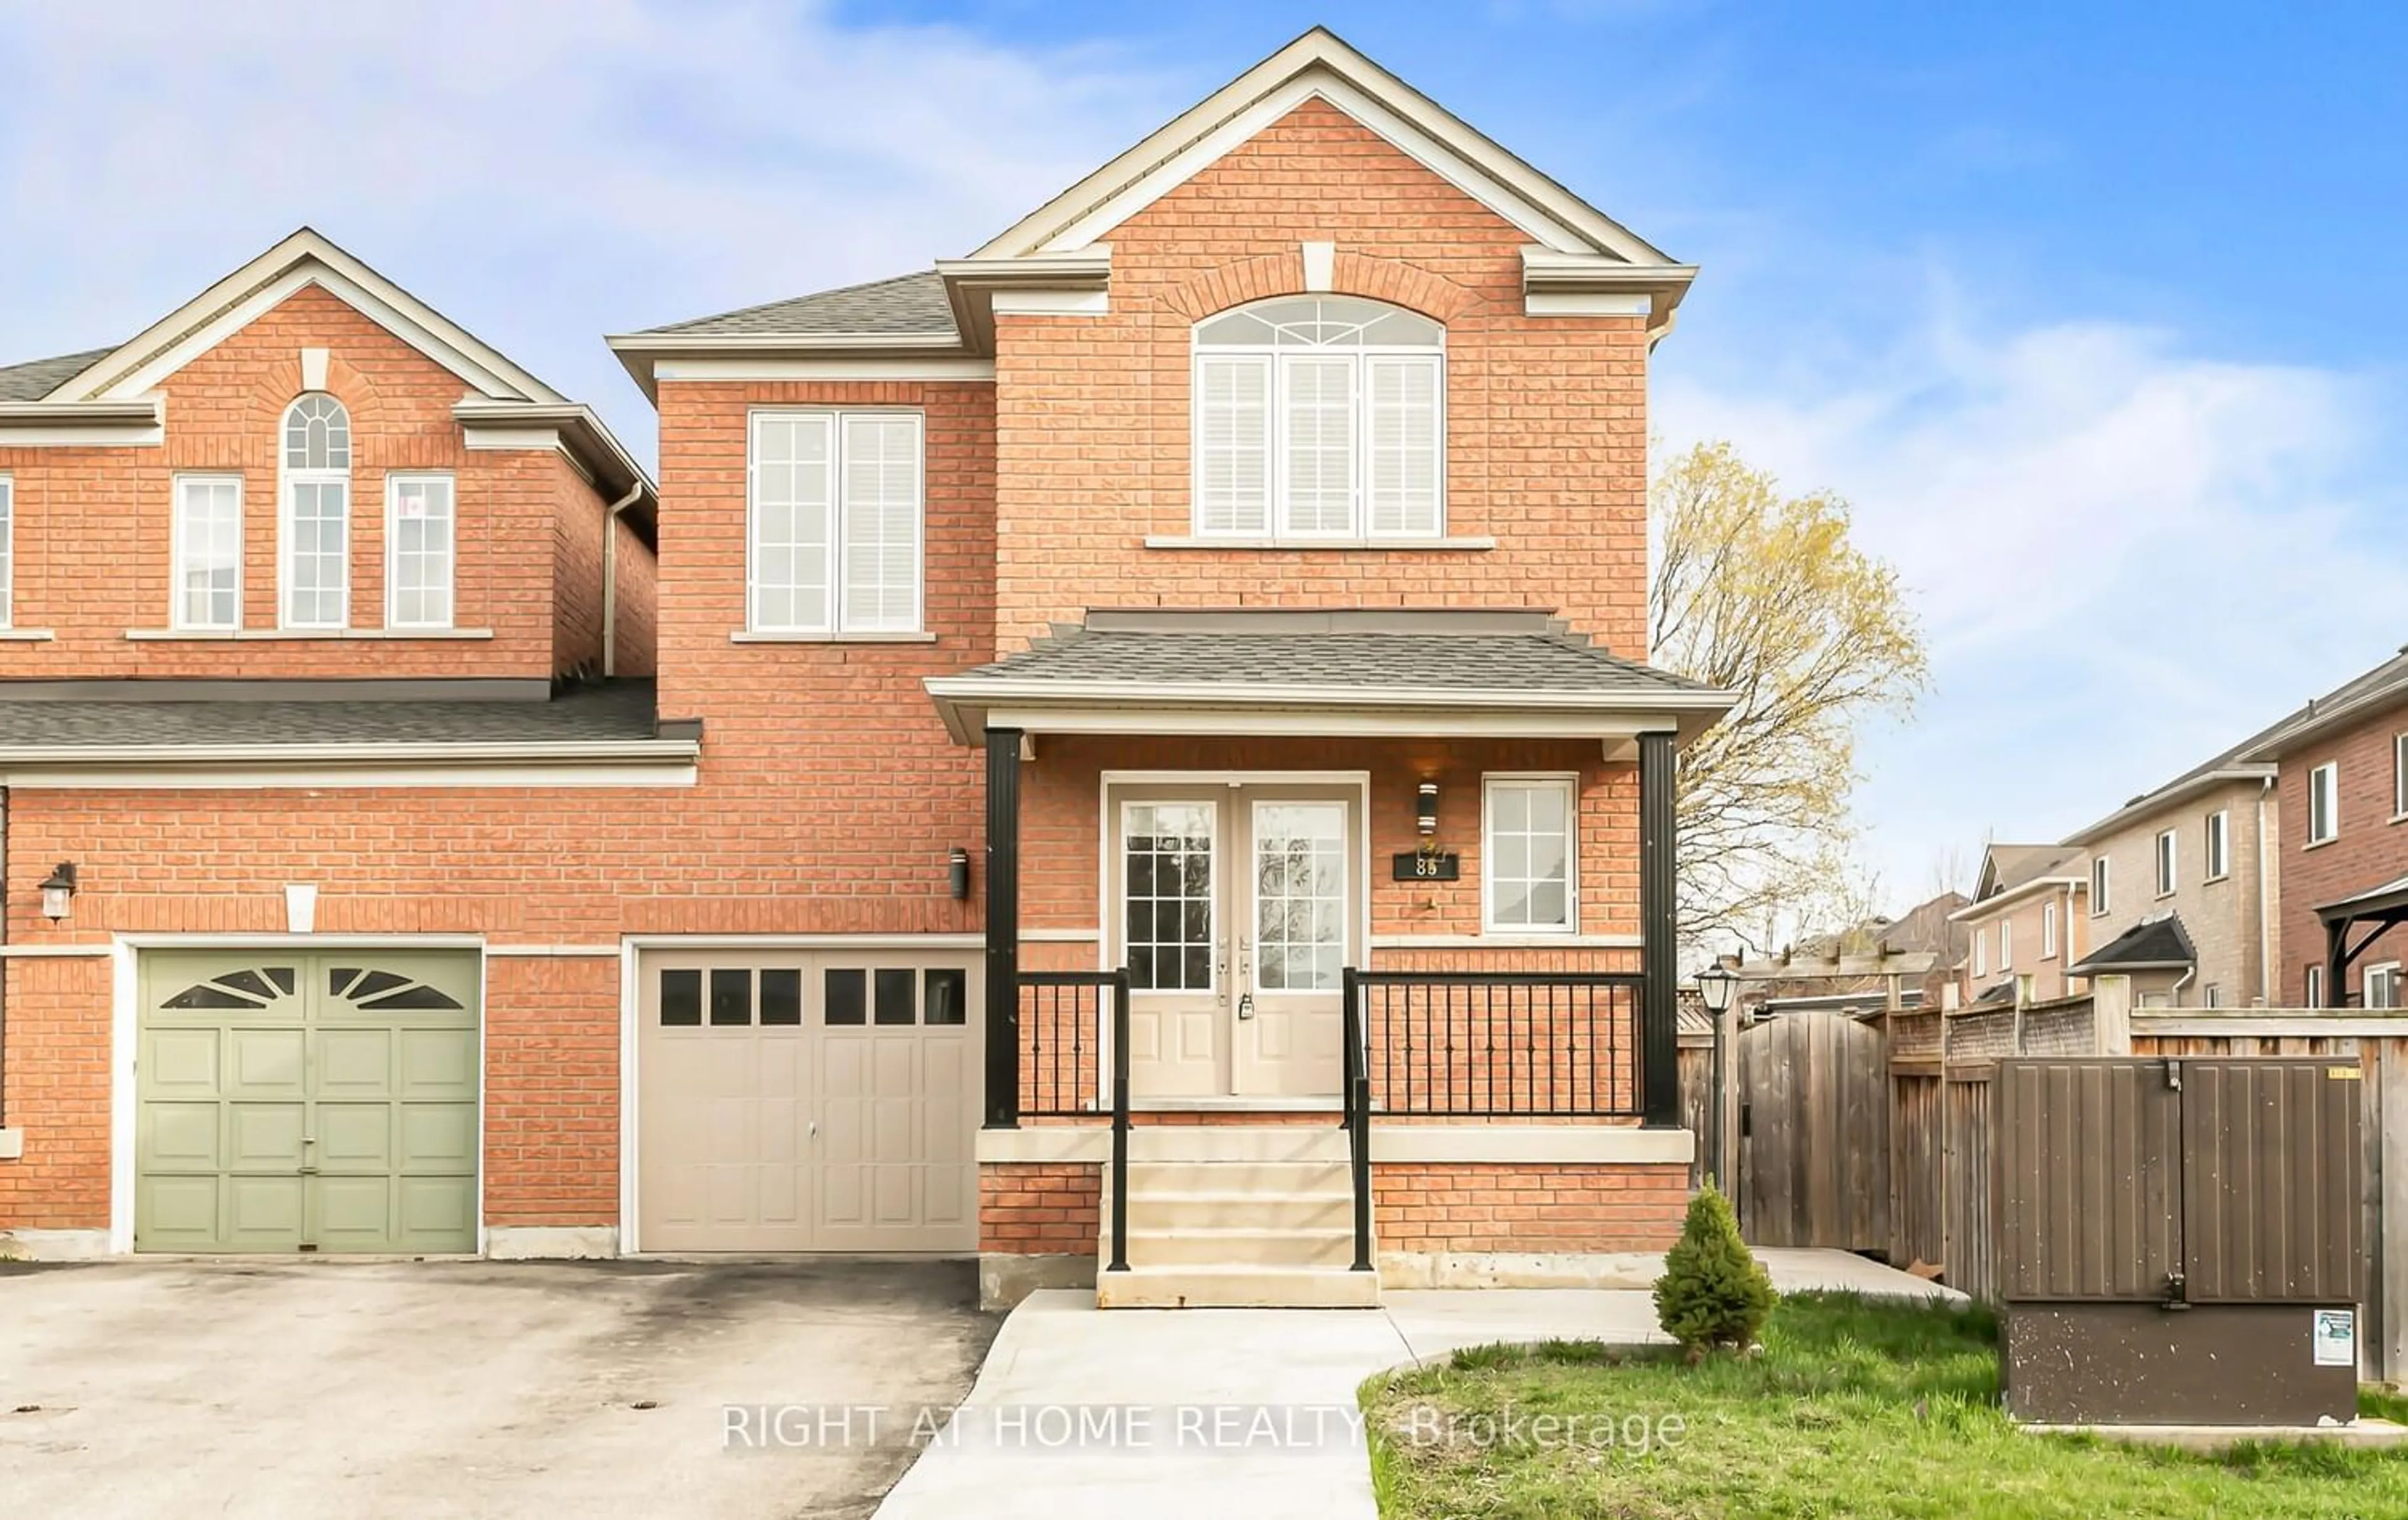 Home with brick exterior material for 85 Viceroy Crescent Cres, Brampton Ontario L7A 1V4